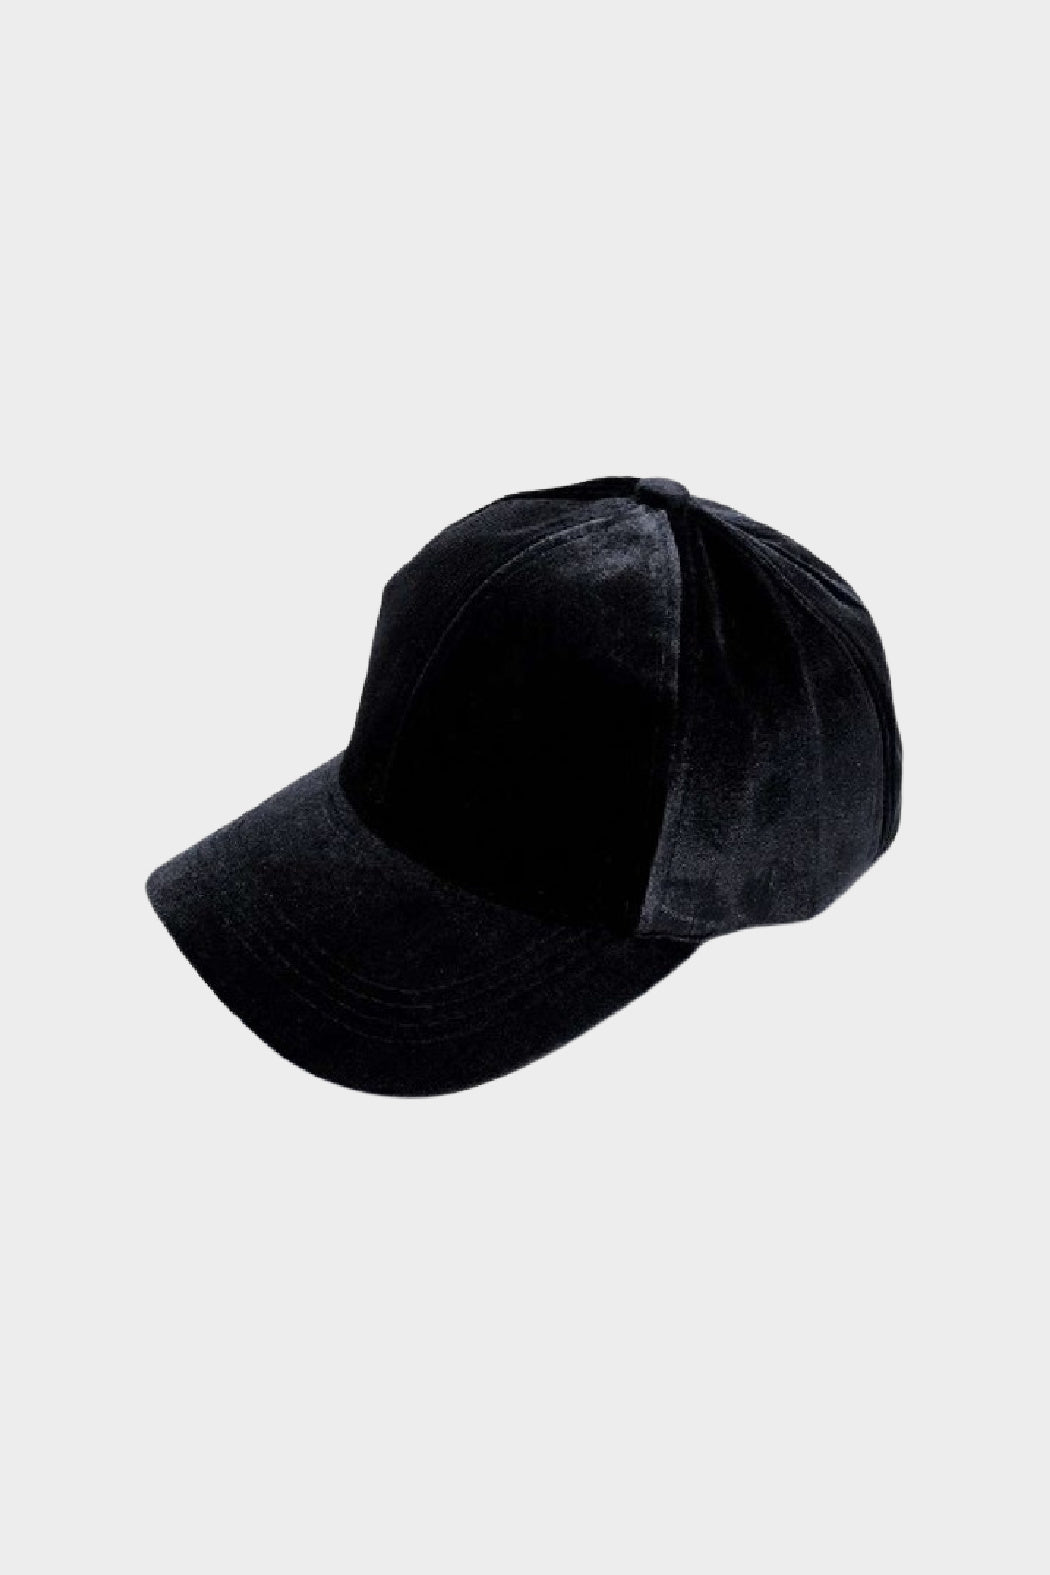 Up-Cycled Gucci Button on Velvet Cap - Embellish Your Life 